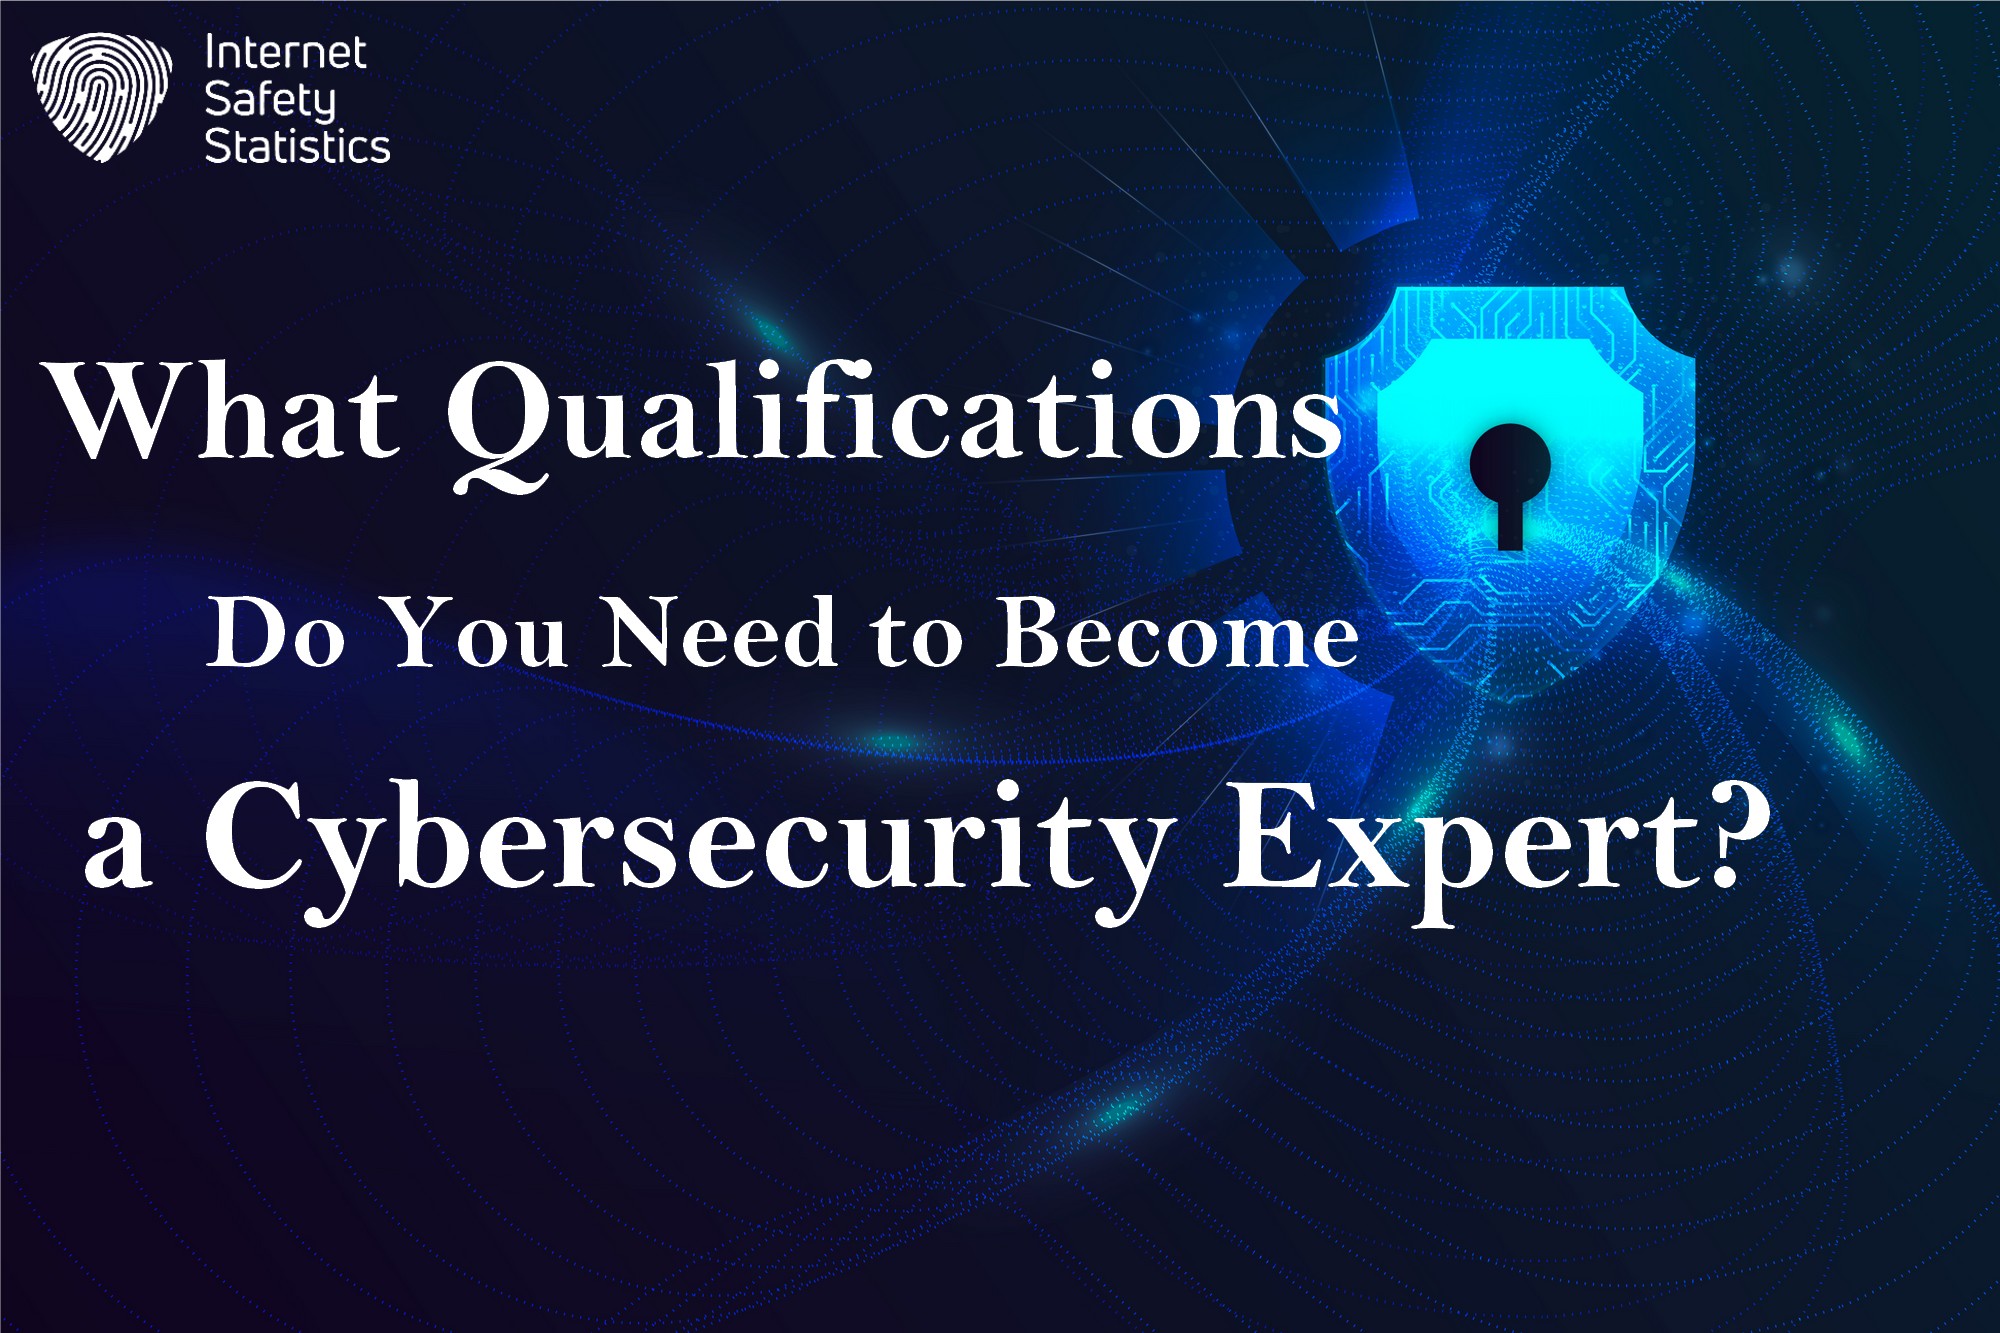 How to Become a Cybersecurity Expert? What Qualifications Do You Need to Become a Cybersecurity Expert